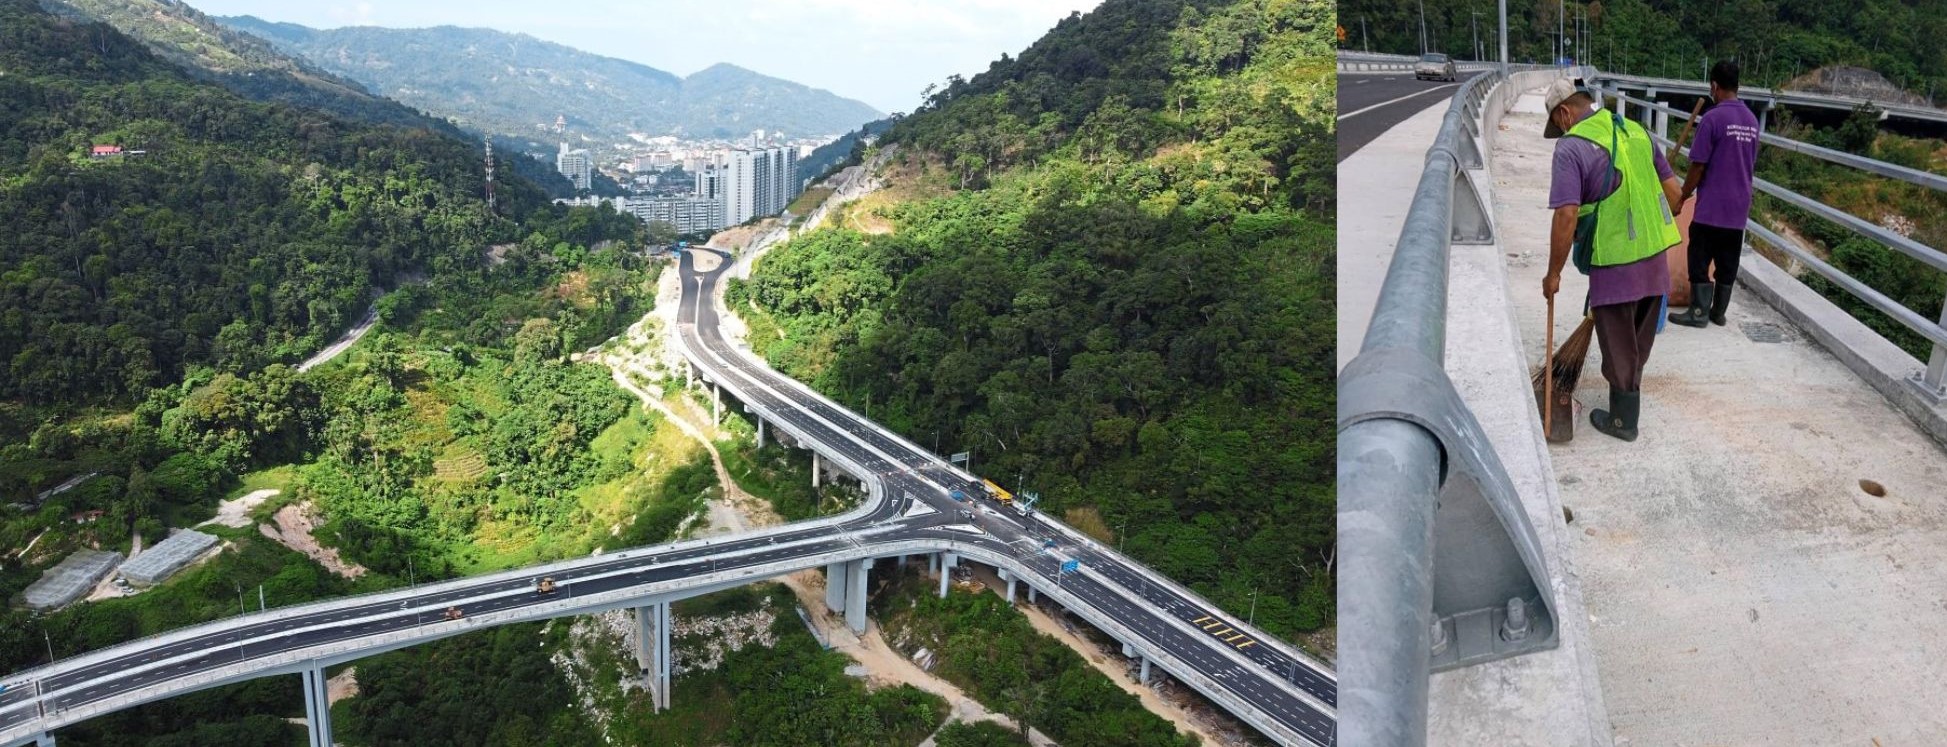 It may be Malaysia’s highest elevated highway but it only took 2 weeks for it to be filled with trash.